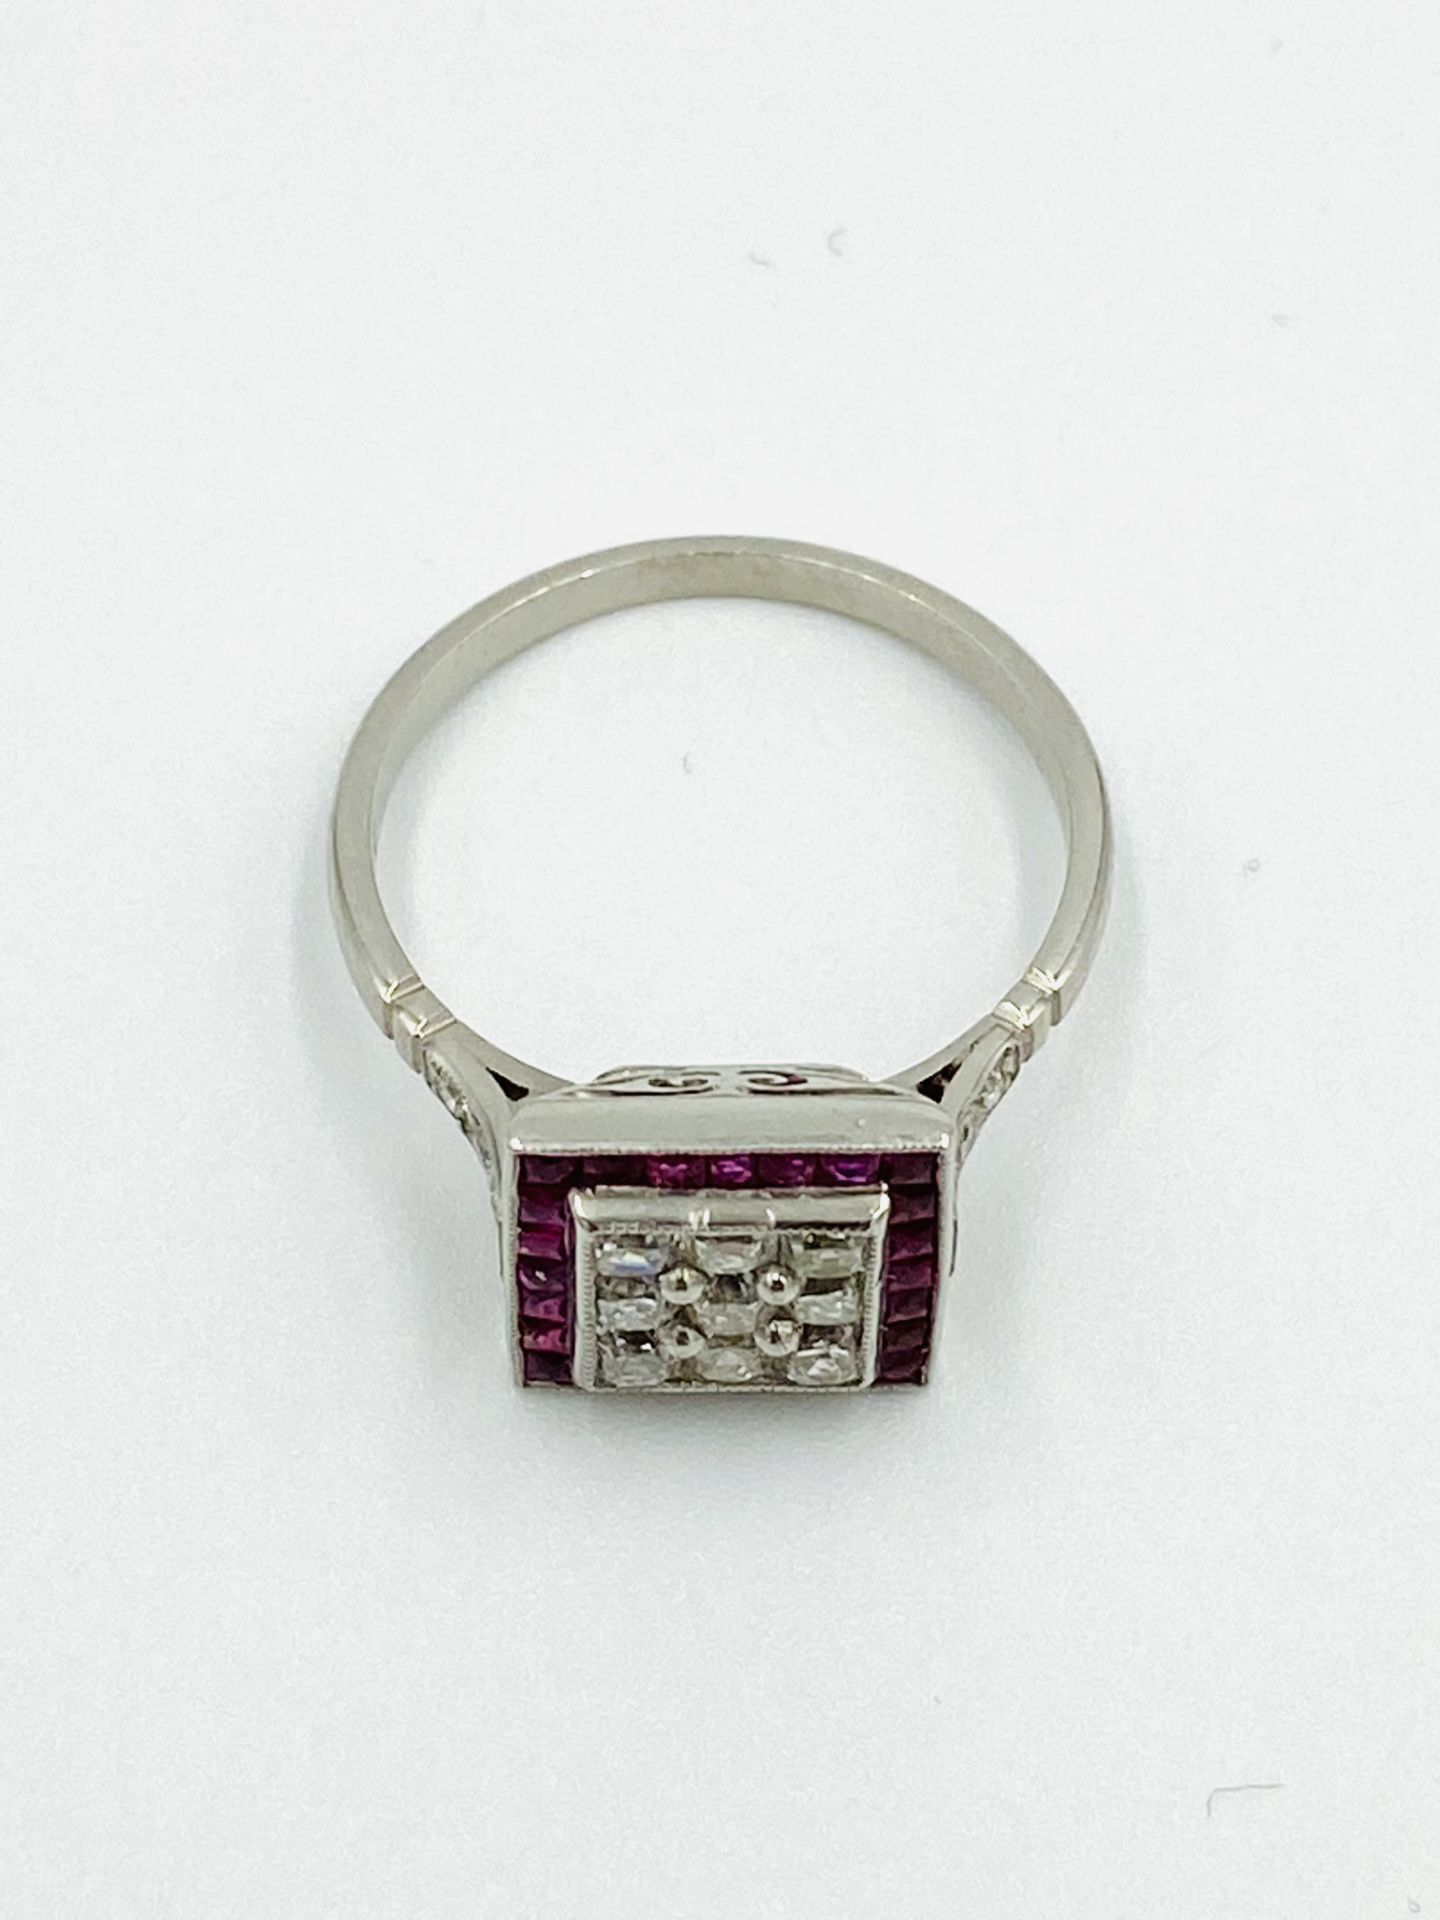 18ct white gold, diamond and ruby ring - Image 4 of 5